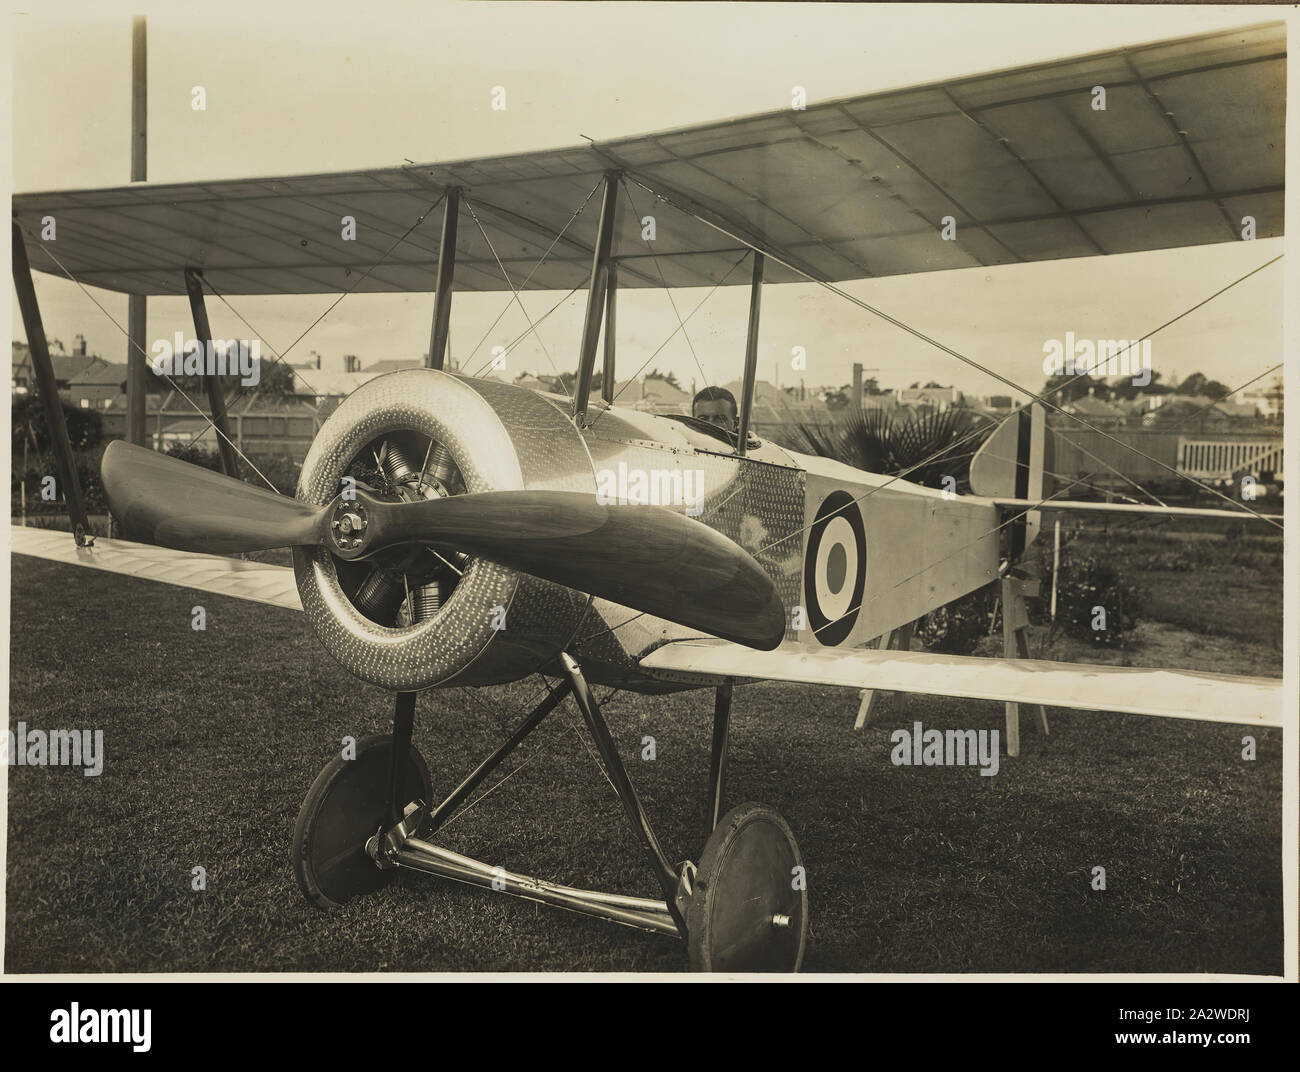 Photograph - Basil Watson Seated in his Completed Biplane Outside the Family Home, 'Foilacleugh', Elsternwick, Victoria, 1916, Part of a commemorative photograph album produced by Sears' Studios, Melbourne, documenting the work of Basil Watson in constructing a biplane at his family's home 'Foilacleugh' in Elsternwick, Victoria, during 1916, and the aftermath of his fatal crash off Point Cook on 28th March 1917. The biplane was based on the design of the Sopwith Pup Stock Photo